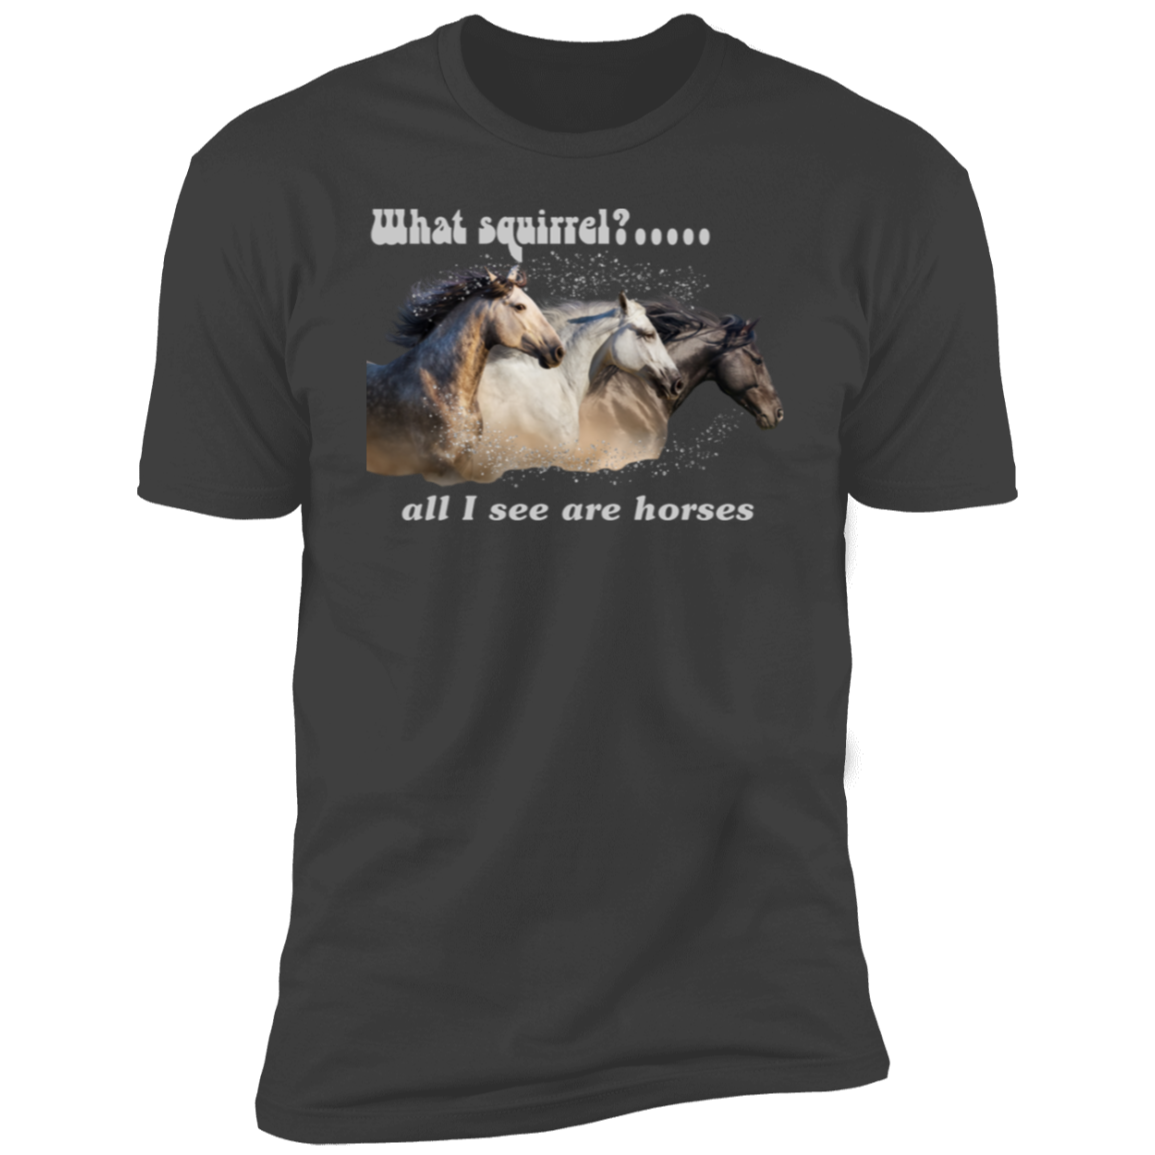 What Squirrel? Funny T-Shirt Unisex